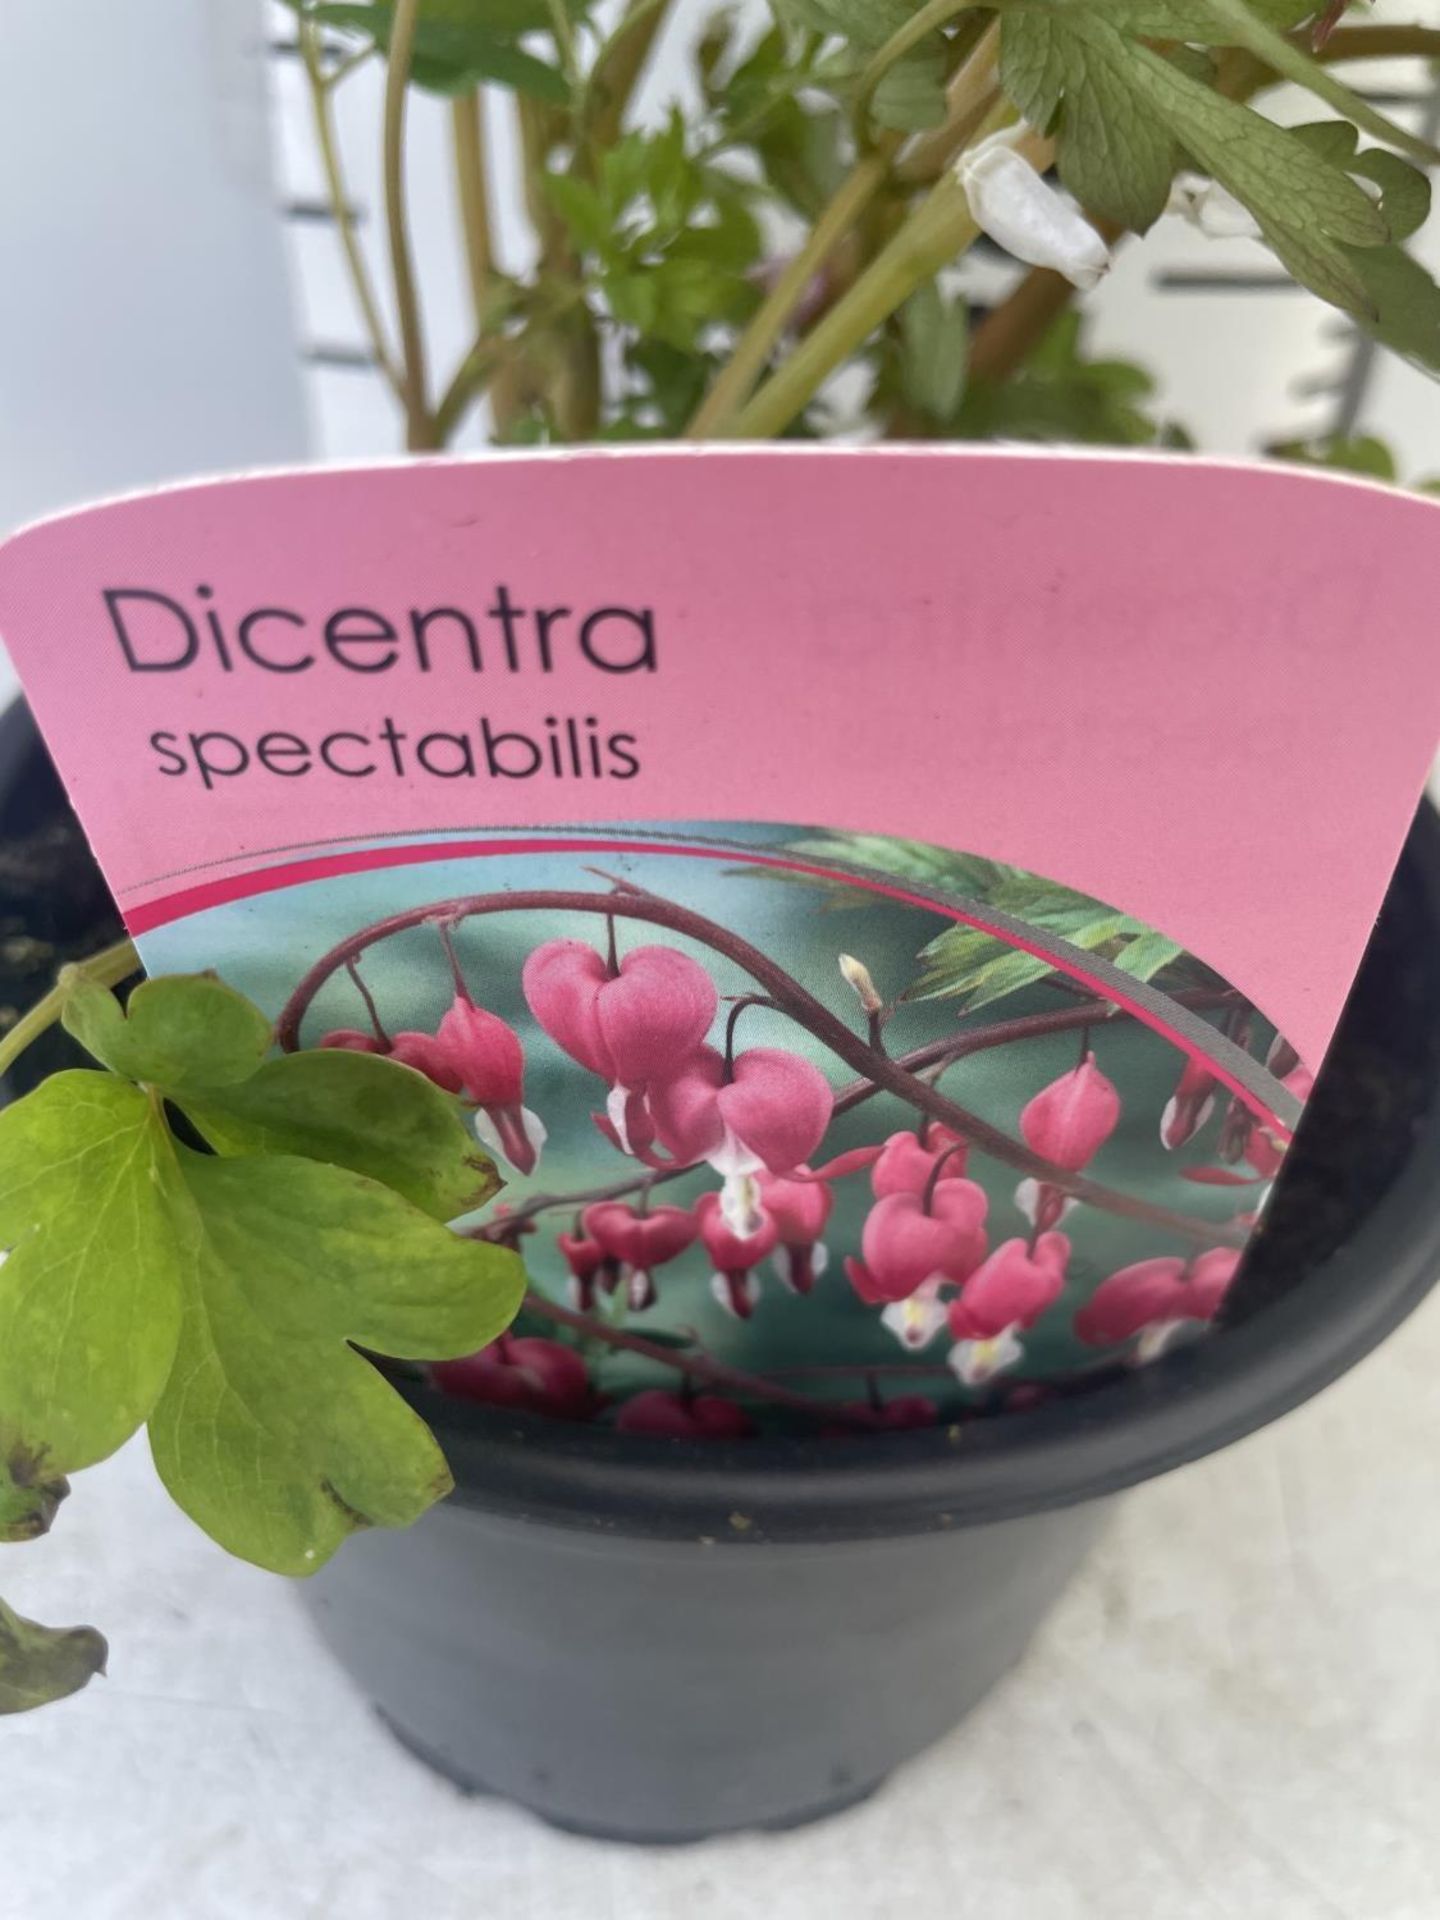 SIX DICENTRA SPECTABILIS BLEEDING HEART 50CM TALL IN 2 LTR POTS TO BE SOLD FOR THE SIX PLUS VAT - Image 10 of 11